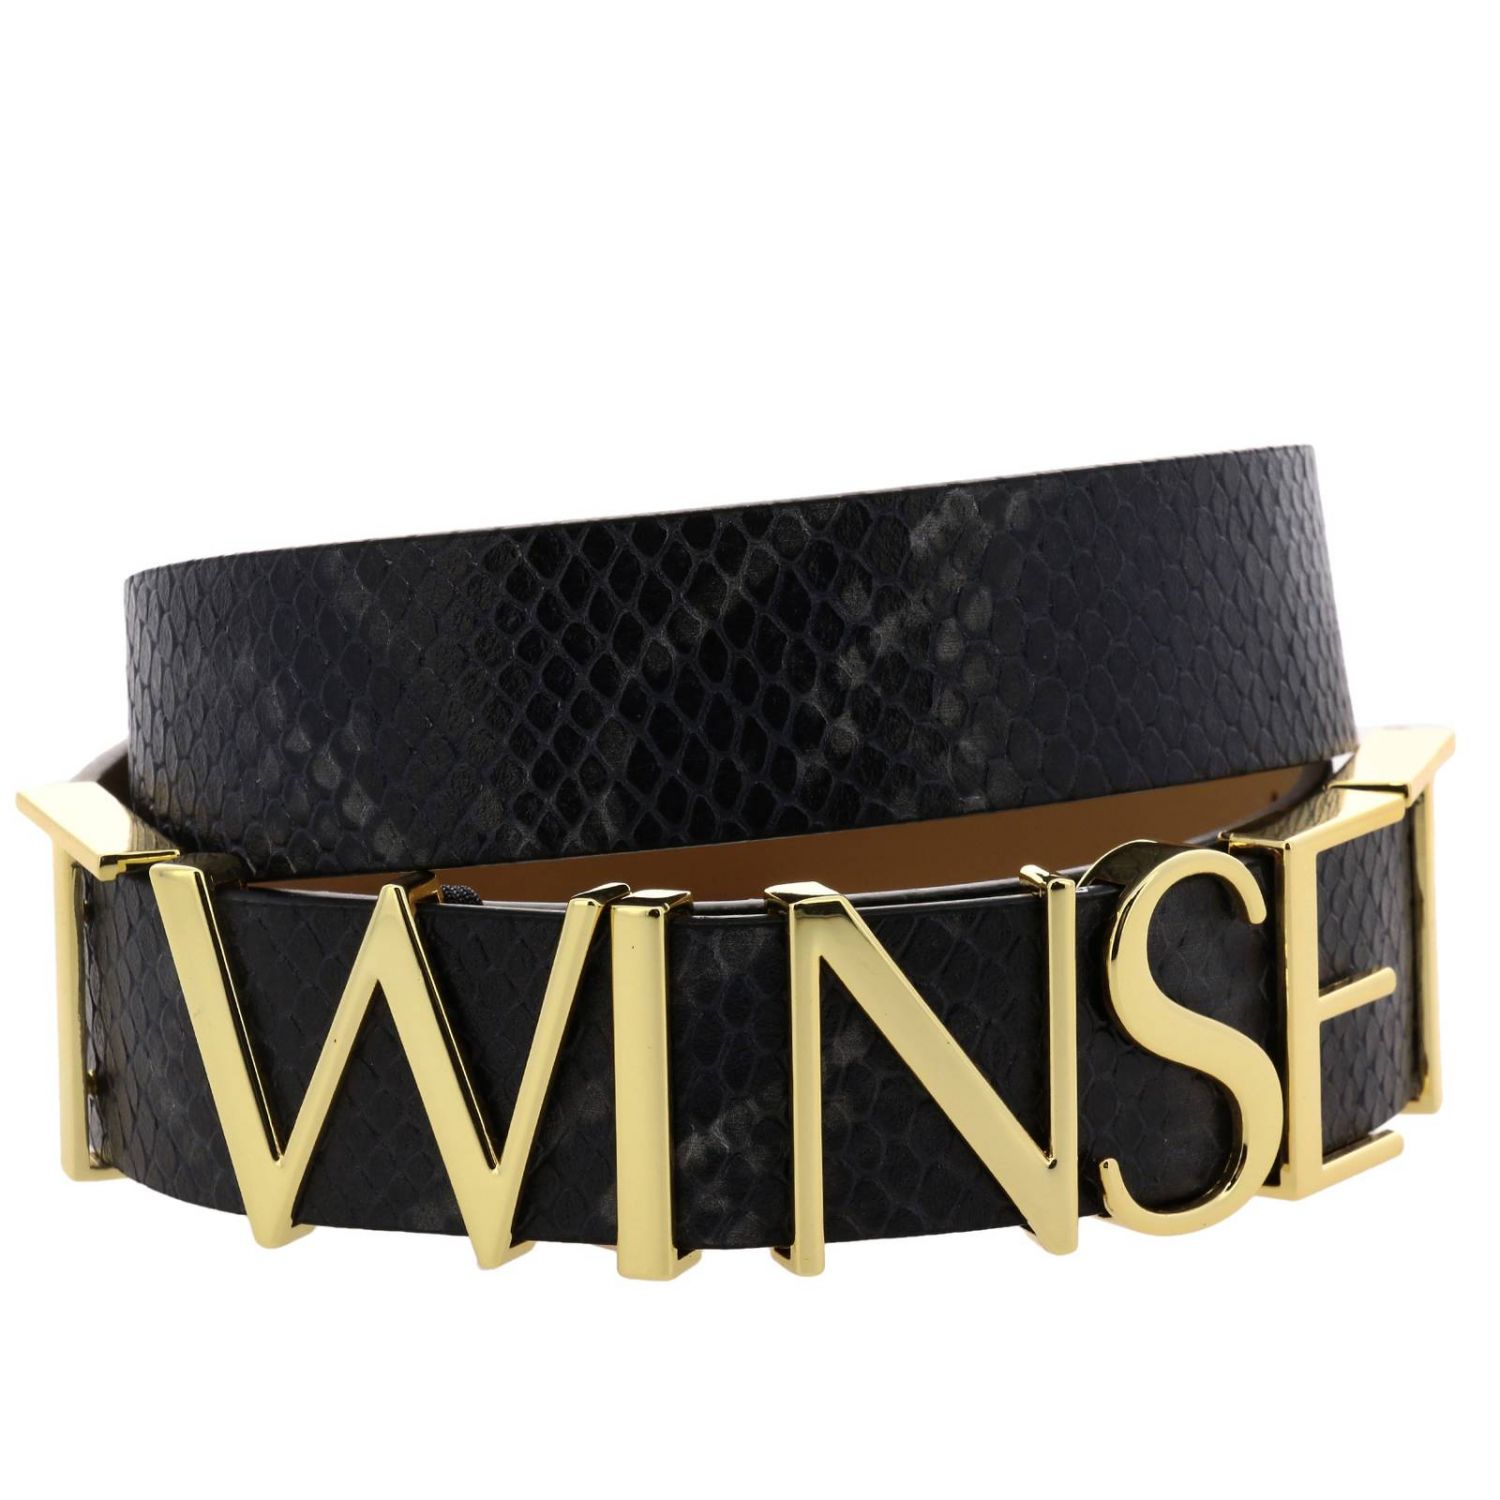 Twinset Outlet: Twin-set belt with snakeskin print and maxi logo - Grey ...